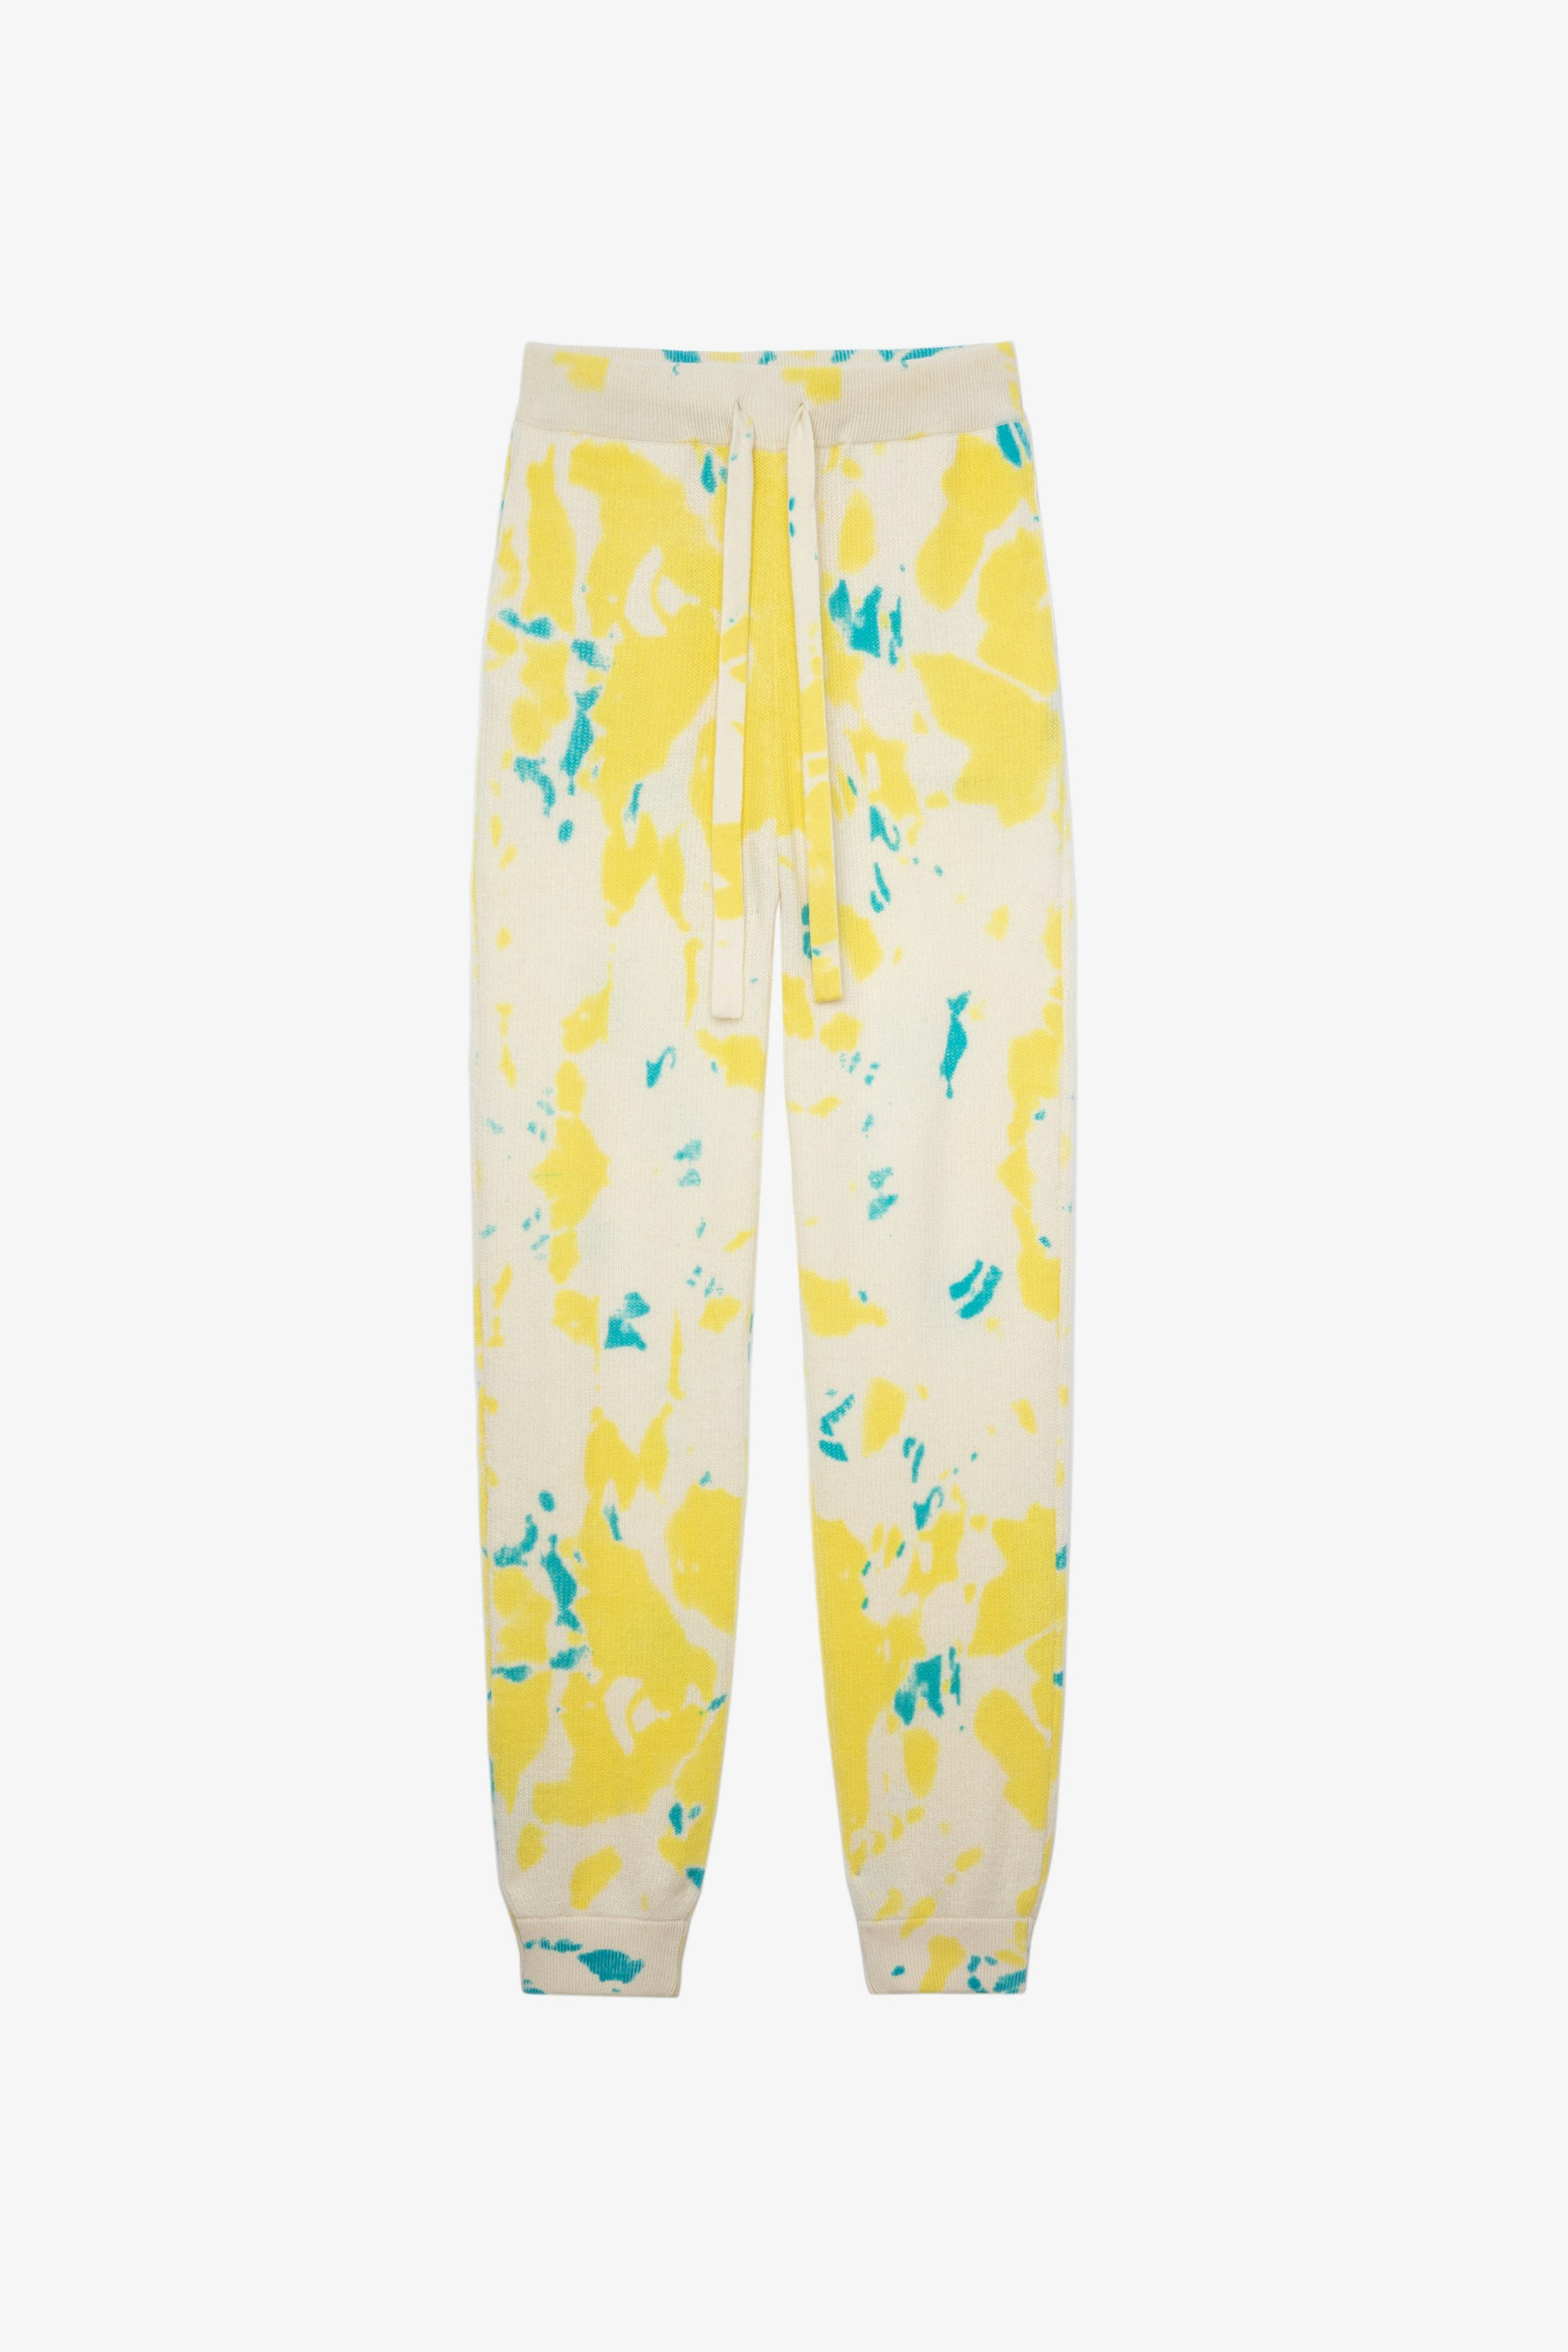 Steevy カシミヤ パンツ Women's blue and yellow tie-dye cashmere bottoms